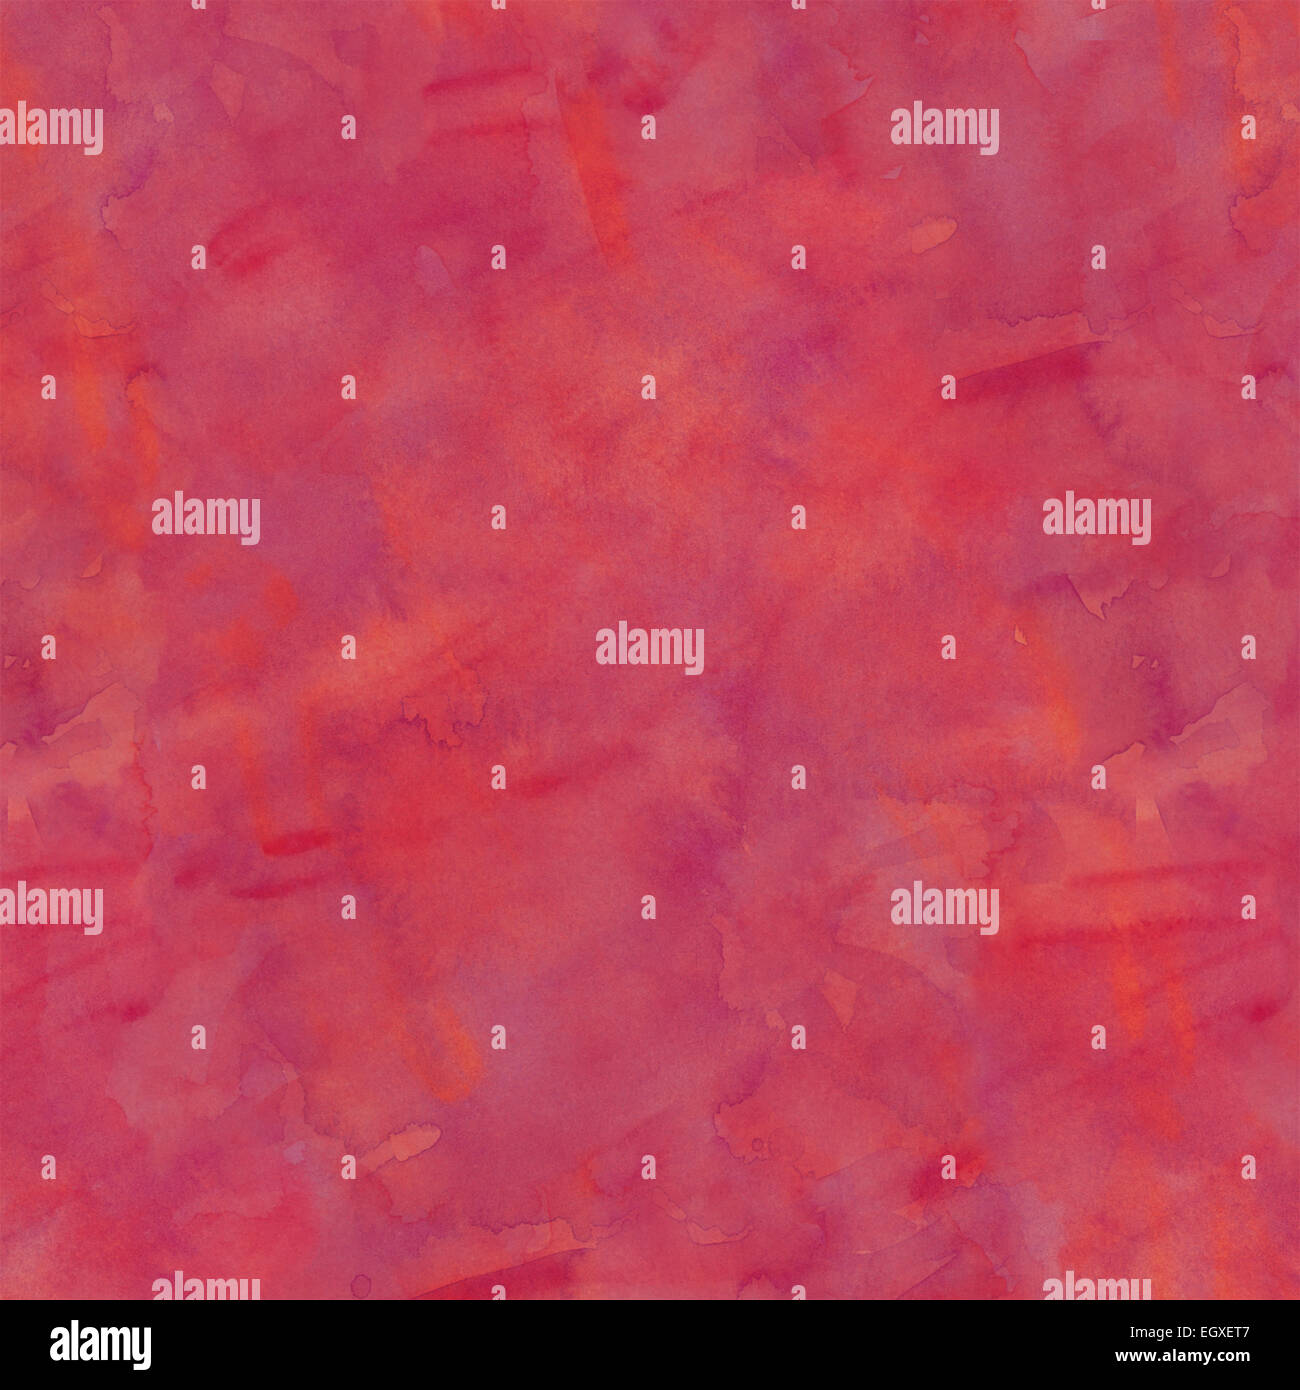 Pink and Orange Watercolor Paper Background Texture Stock Photo